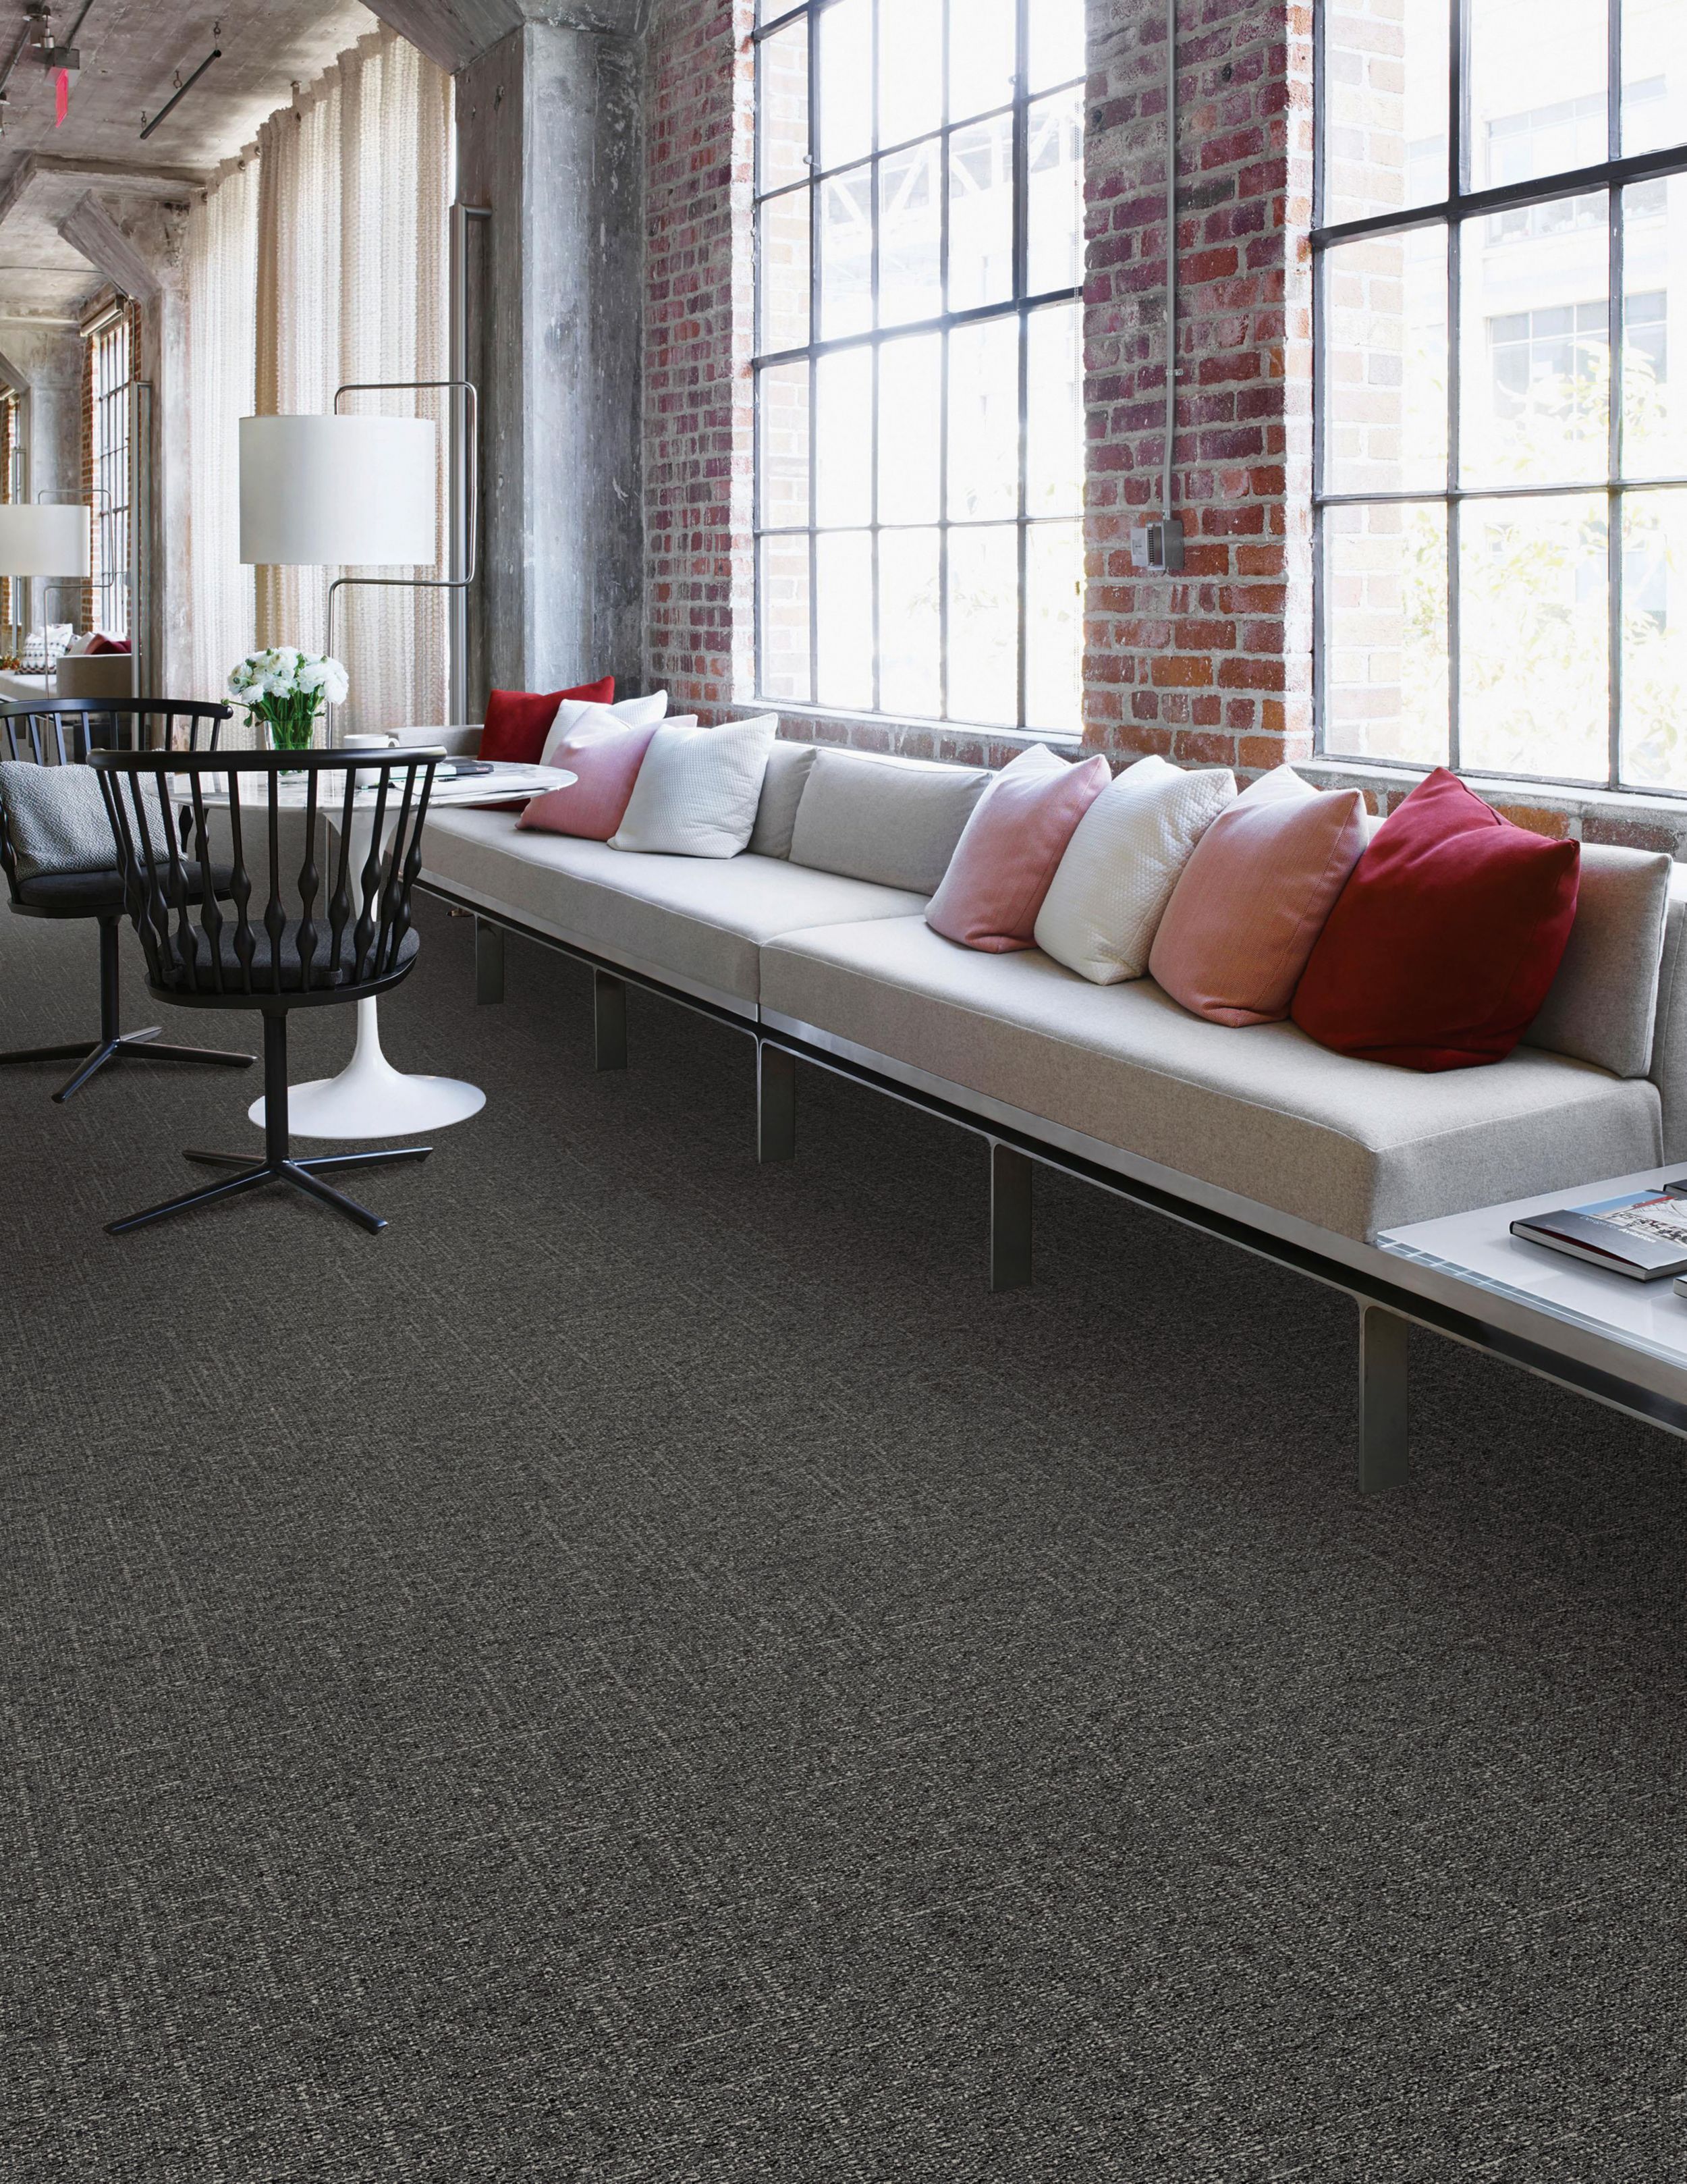 Interface DL902 carpet tile in public space with long couch image number 1